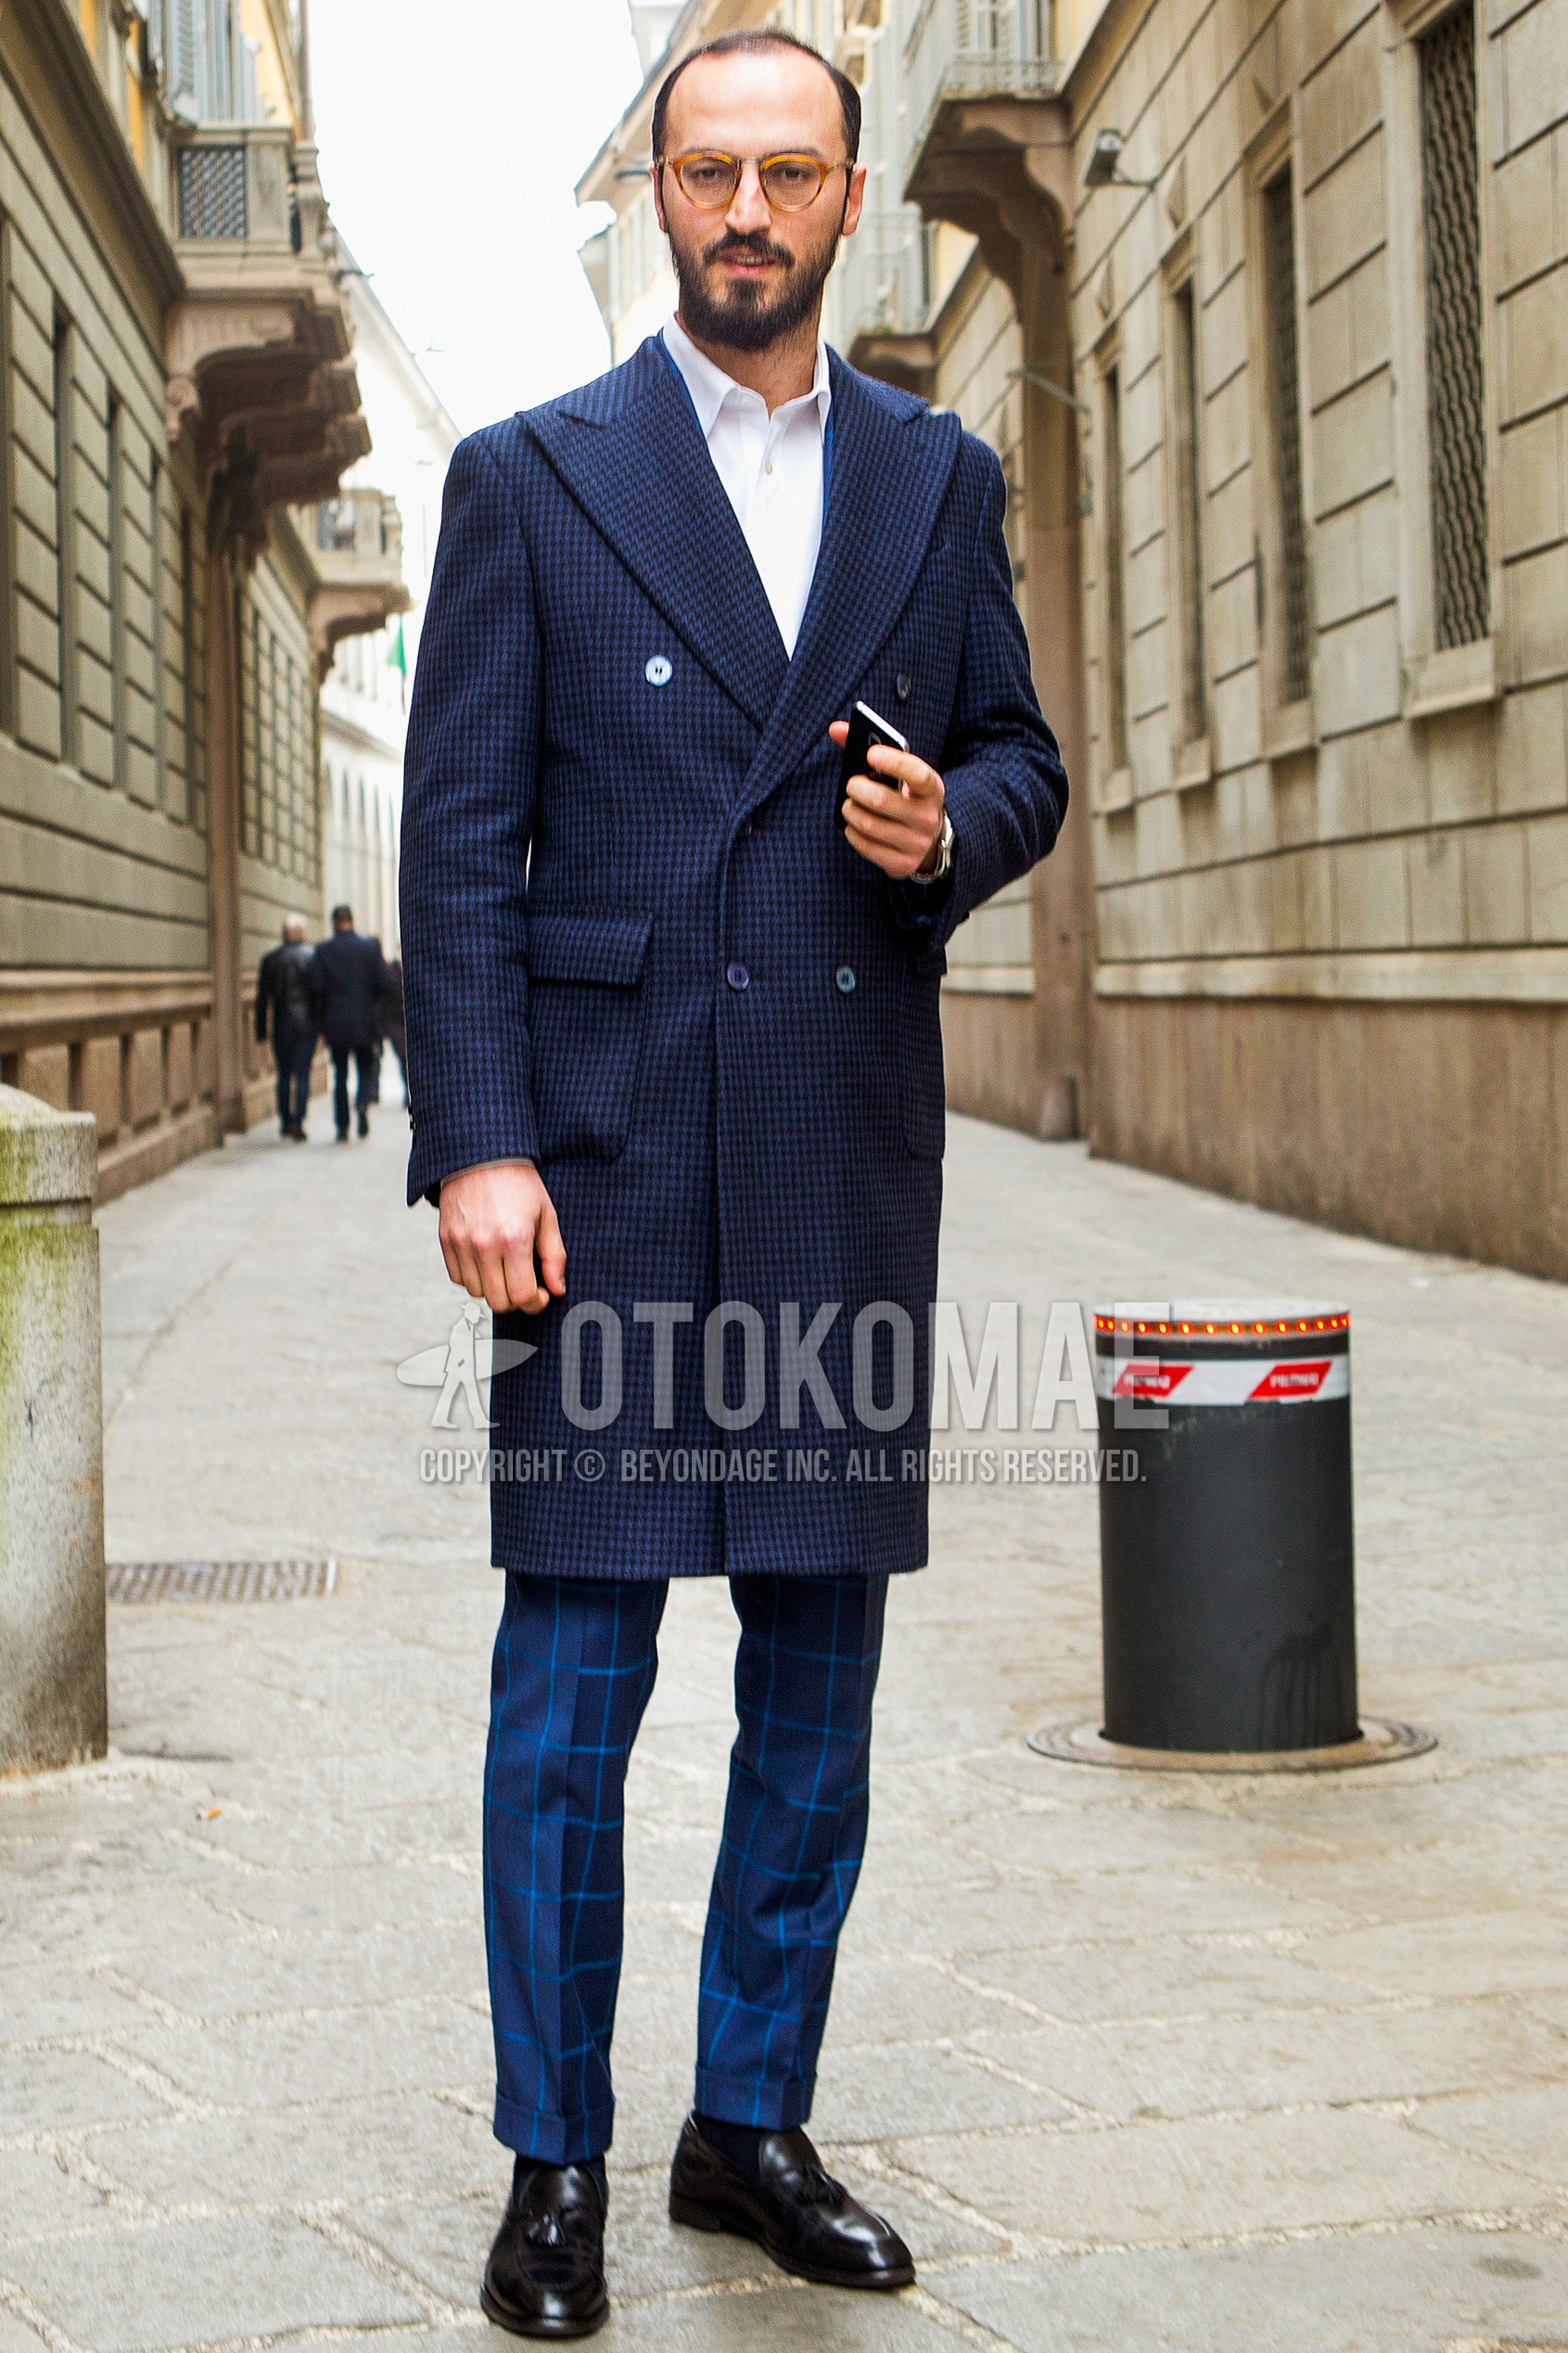 Men's autumn winter outfit with brown tortoiseshell glasses, navy check chester coat, white plain shirt, navy check slacks, black plain socks, black tassel loafers leather shoes.